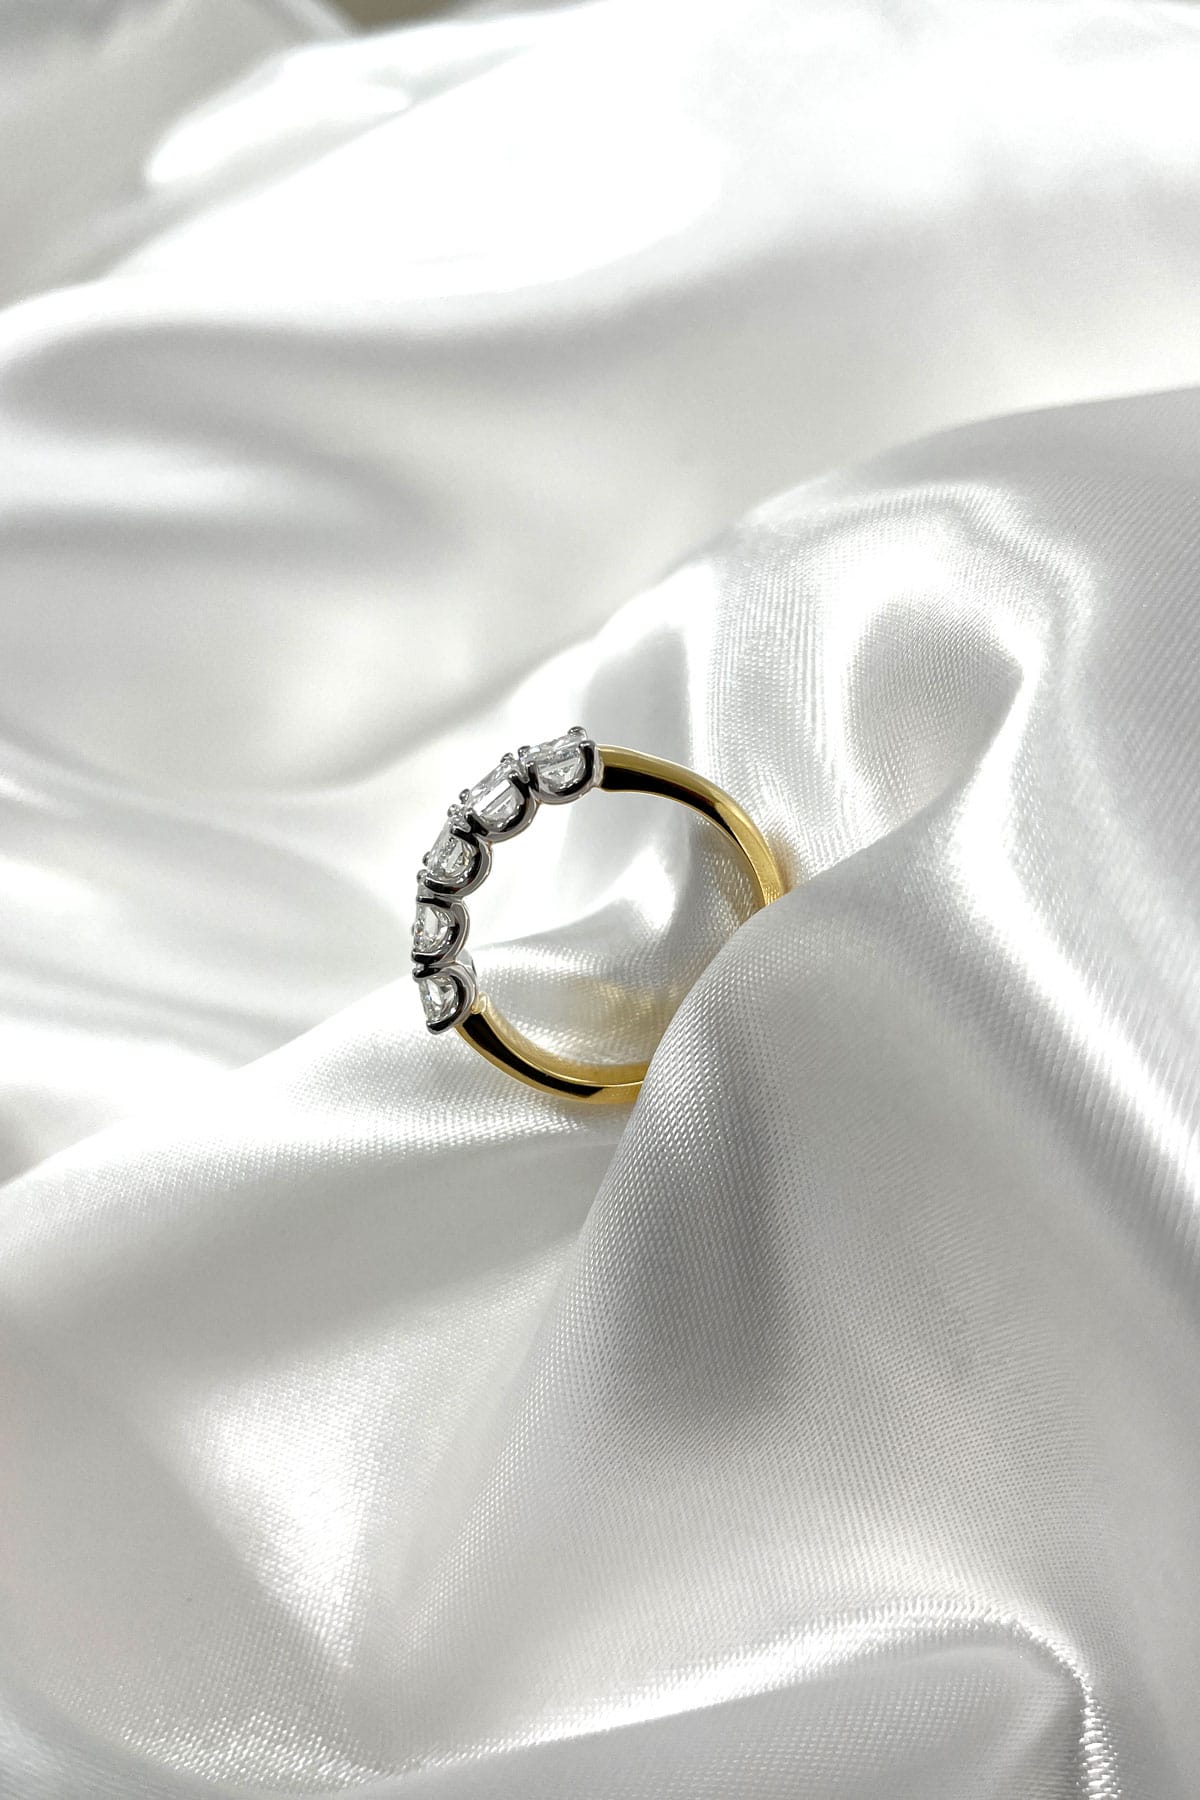 2.56ct Diamond Set Ring set in 18ct Yellow and White Gold. Available at LeGassick Diamonds & Jewellery Gold Coast, Australia.